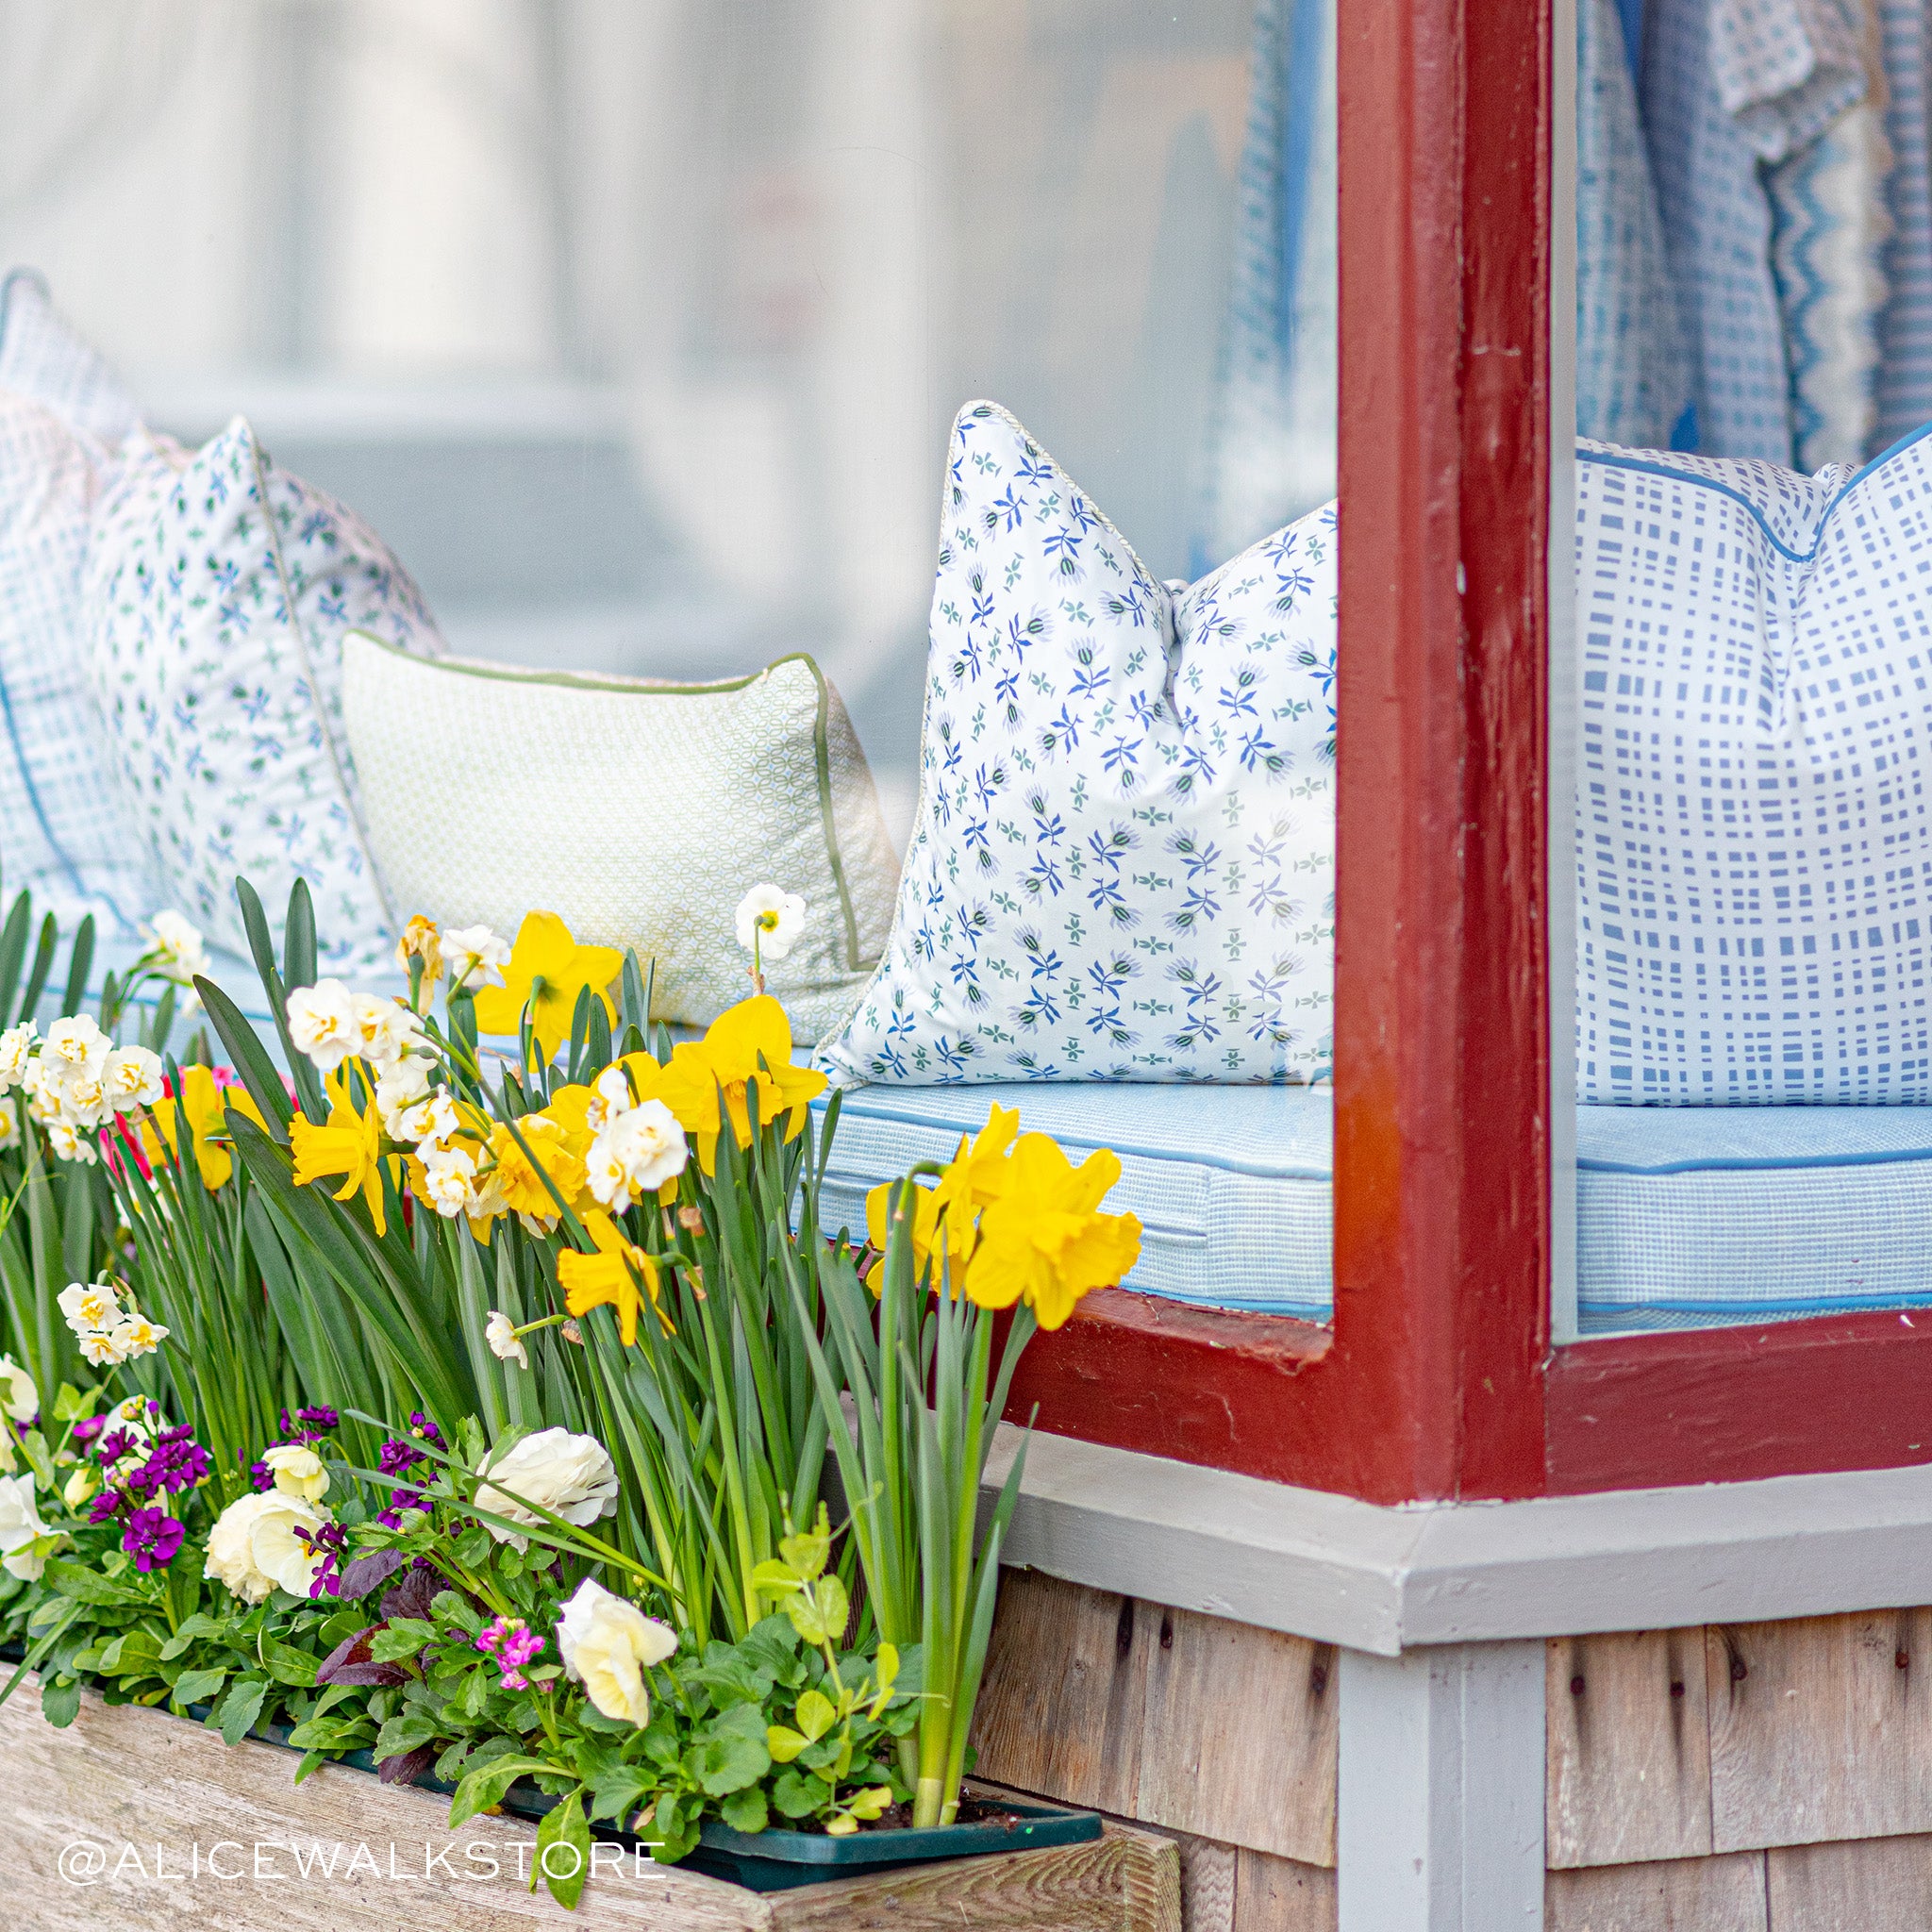 Window Store Close-Up styled with flowers on front and blue mattress inside with Sky Blue Gingham Printed Pillow, Blue & Green Striped Printed Pillow, and Moss Green Geometric Printed Lumbar in the center. Photo taken by Alice Walk Store